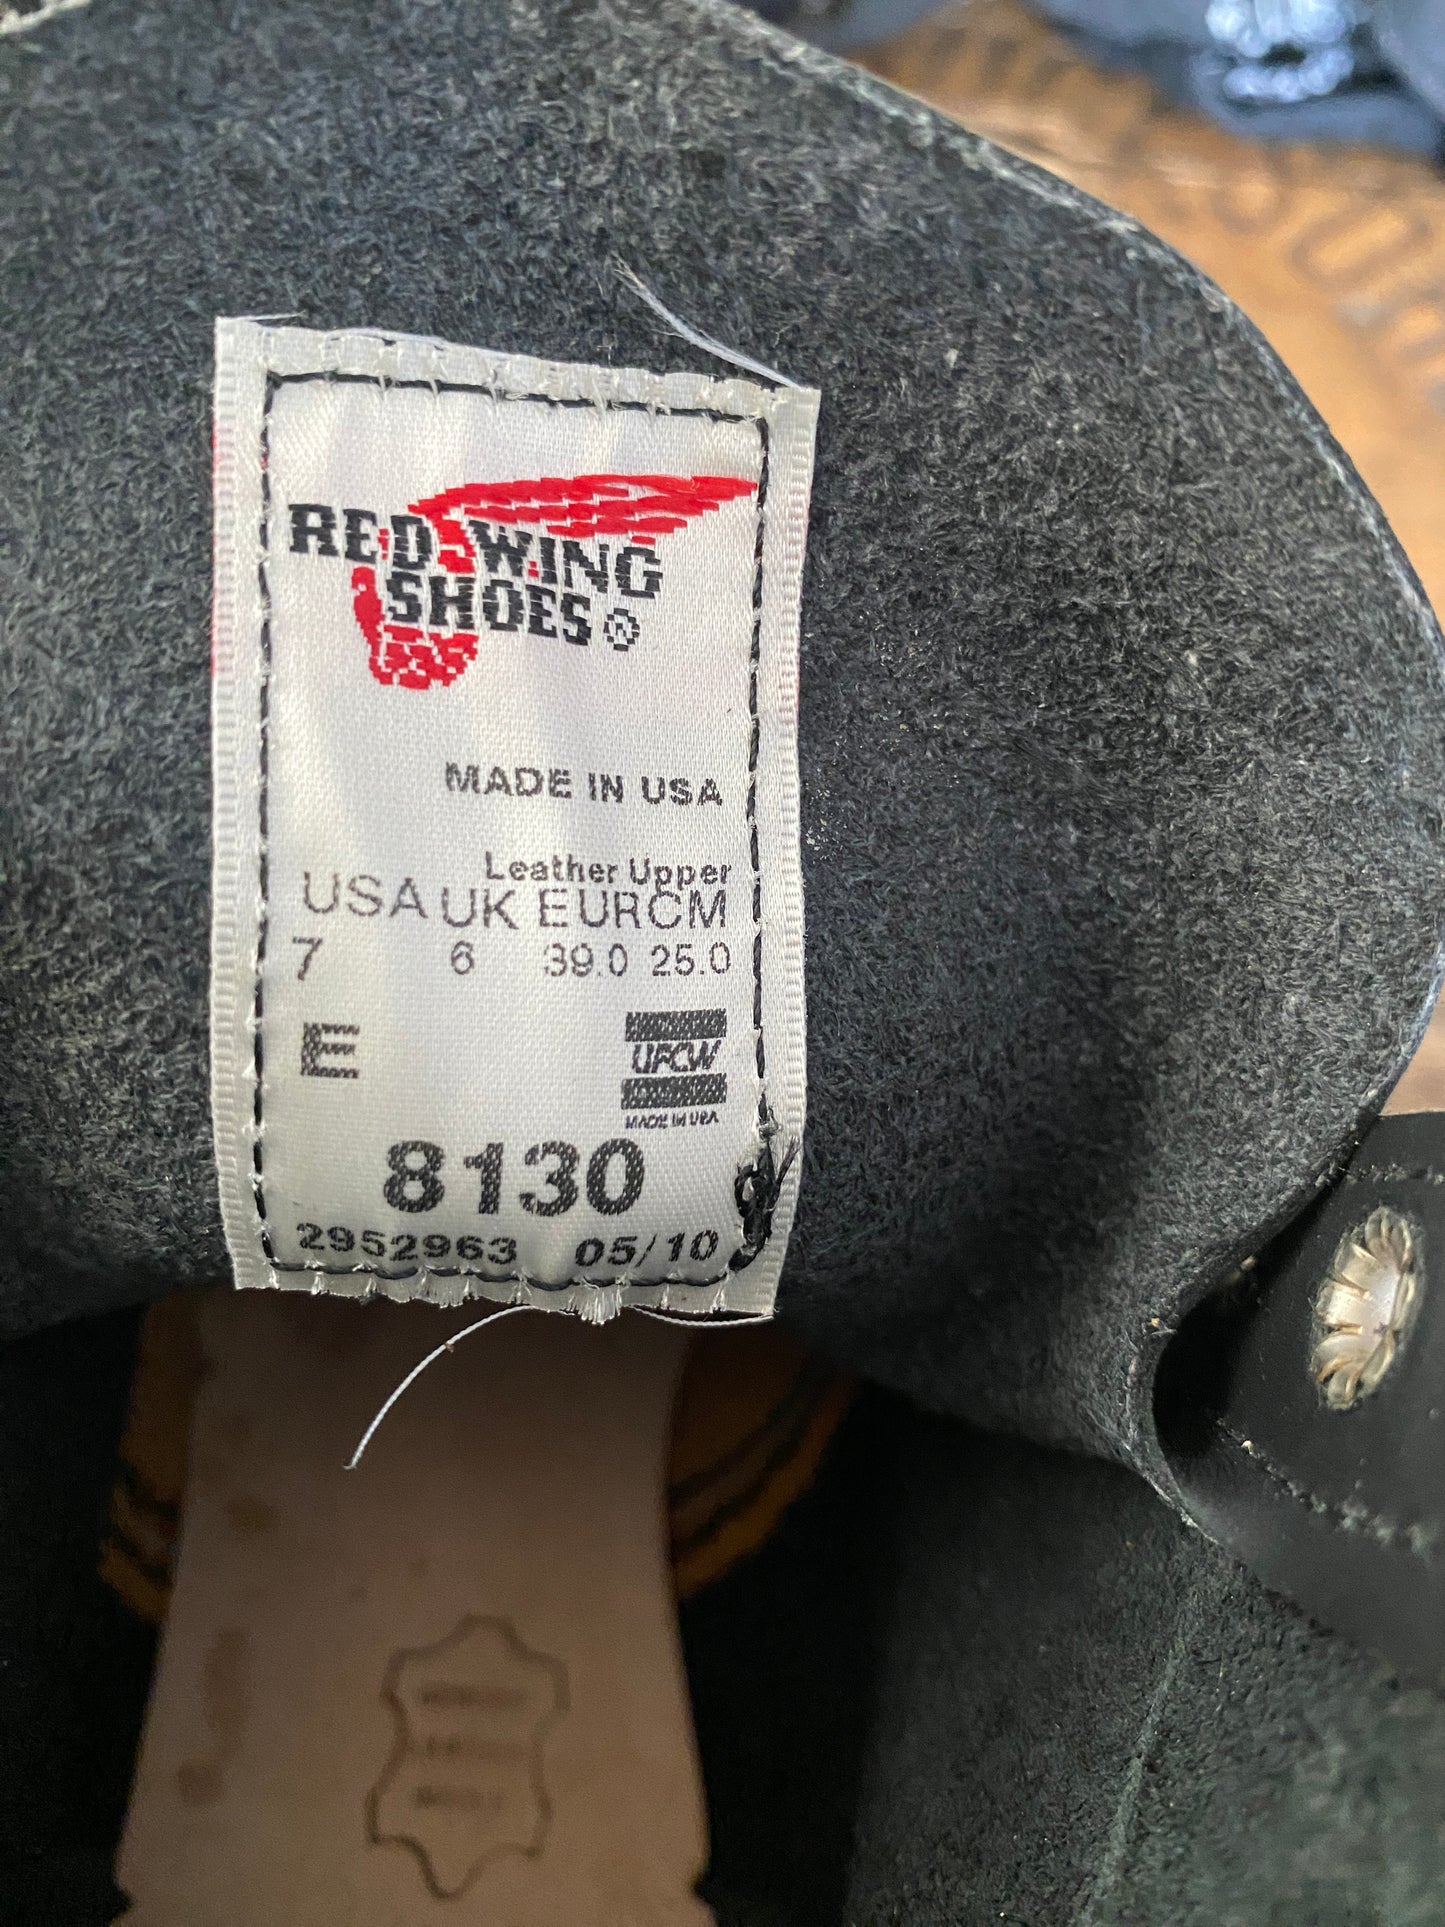 Red Wing 8130 Moc Toe Black Boots, size 7E (39 Euro) - front view. Made in USA. Factory seconds.